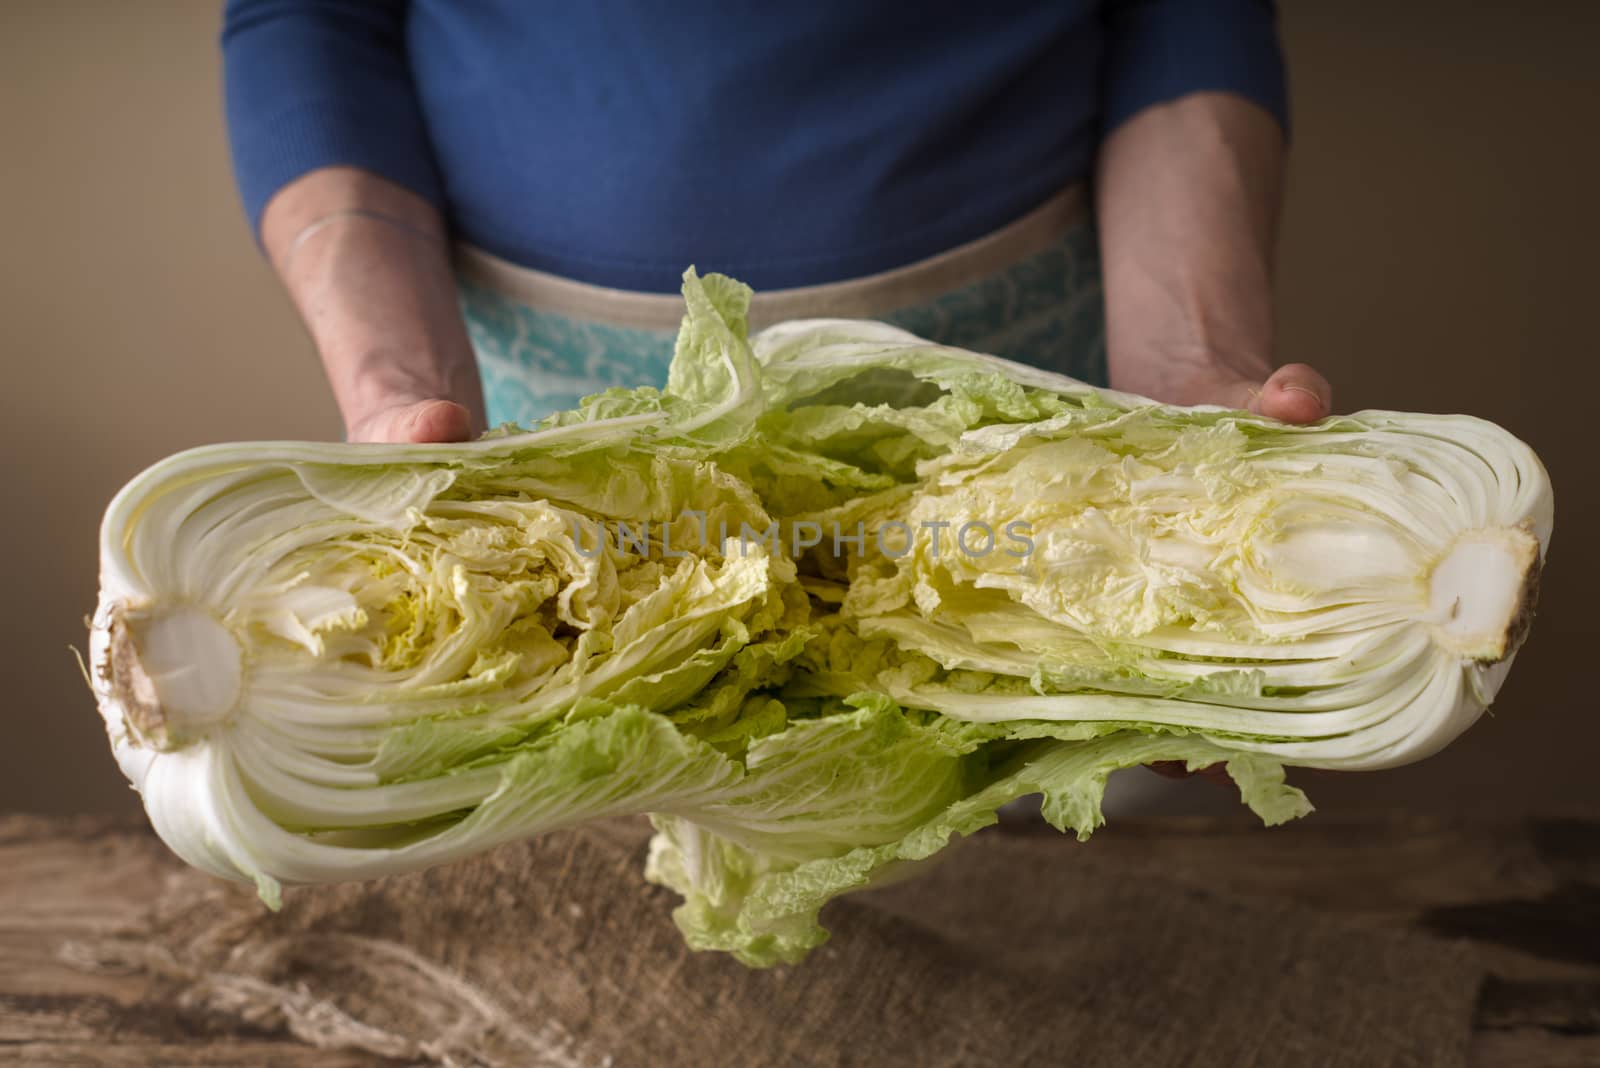 Woman shares the Chinese cabbage into two halves on the board by Deniskarpenkov